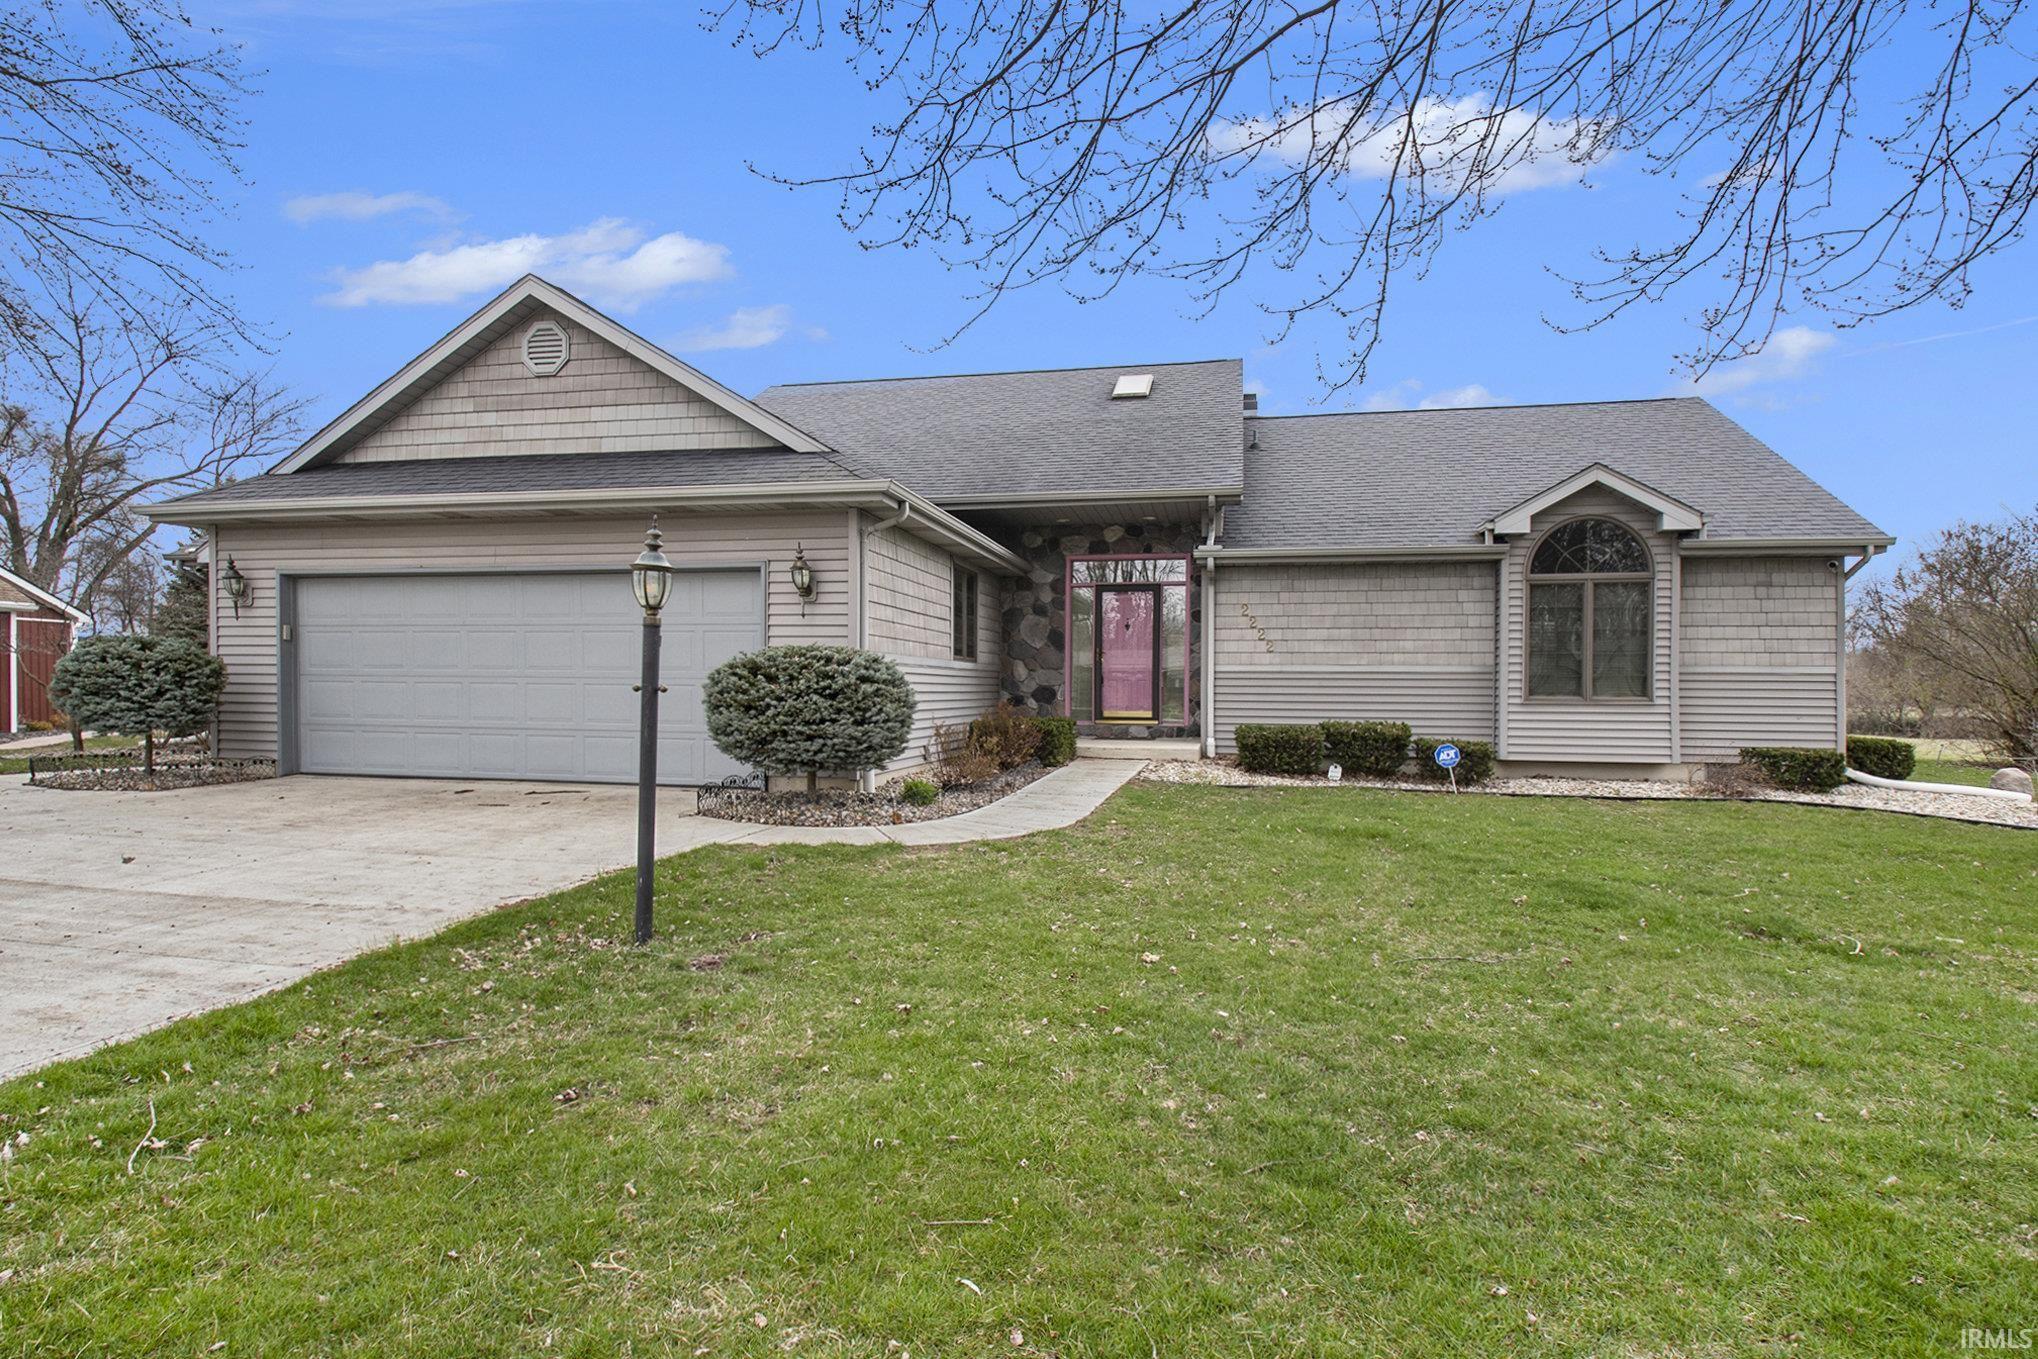 2222 Bluewater Drive, Warsaw, IN 